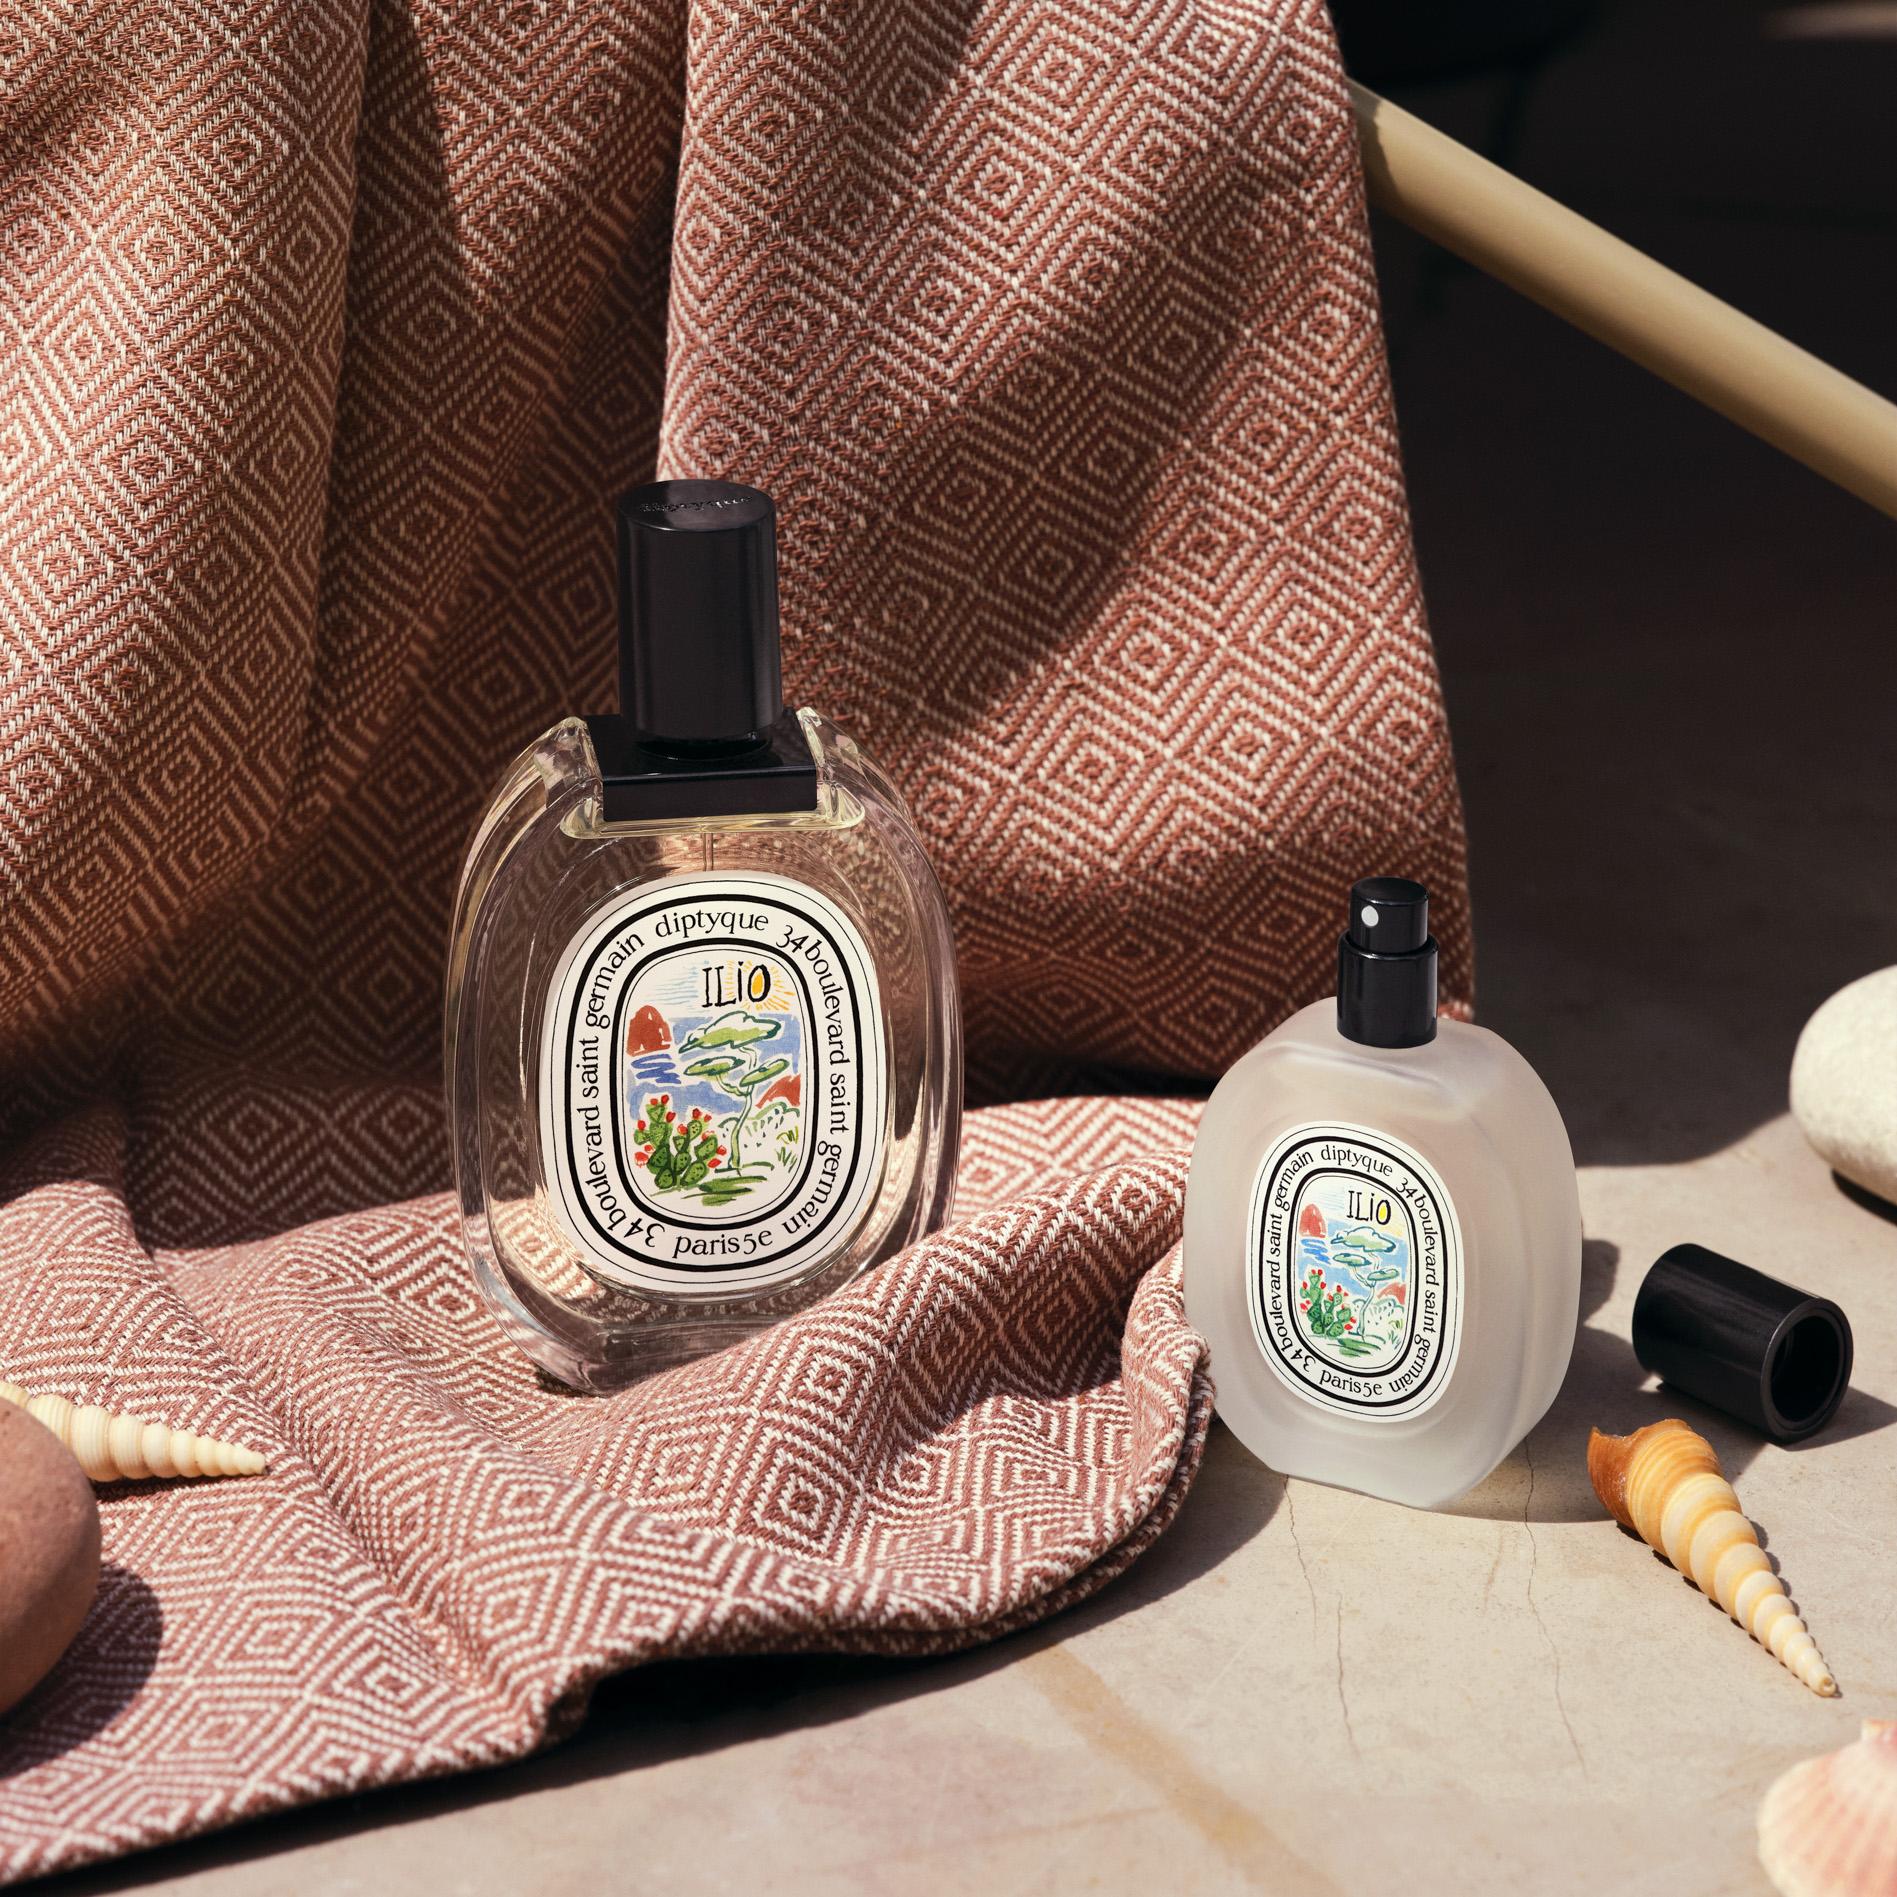 Two bottles of Diptyque perfume